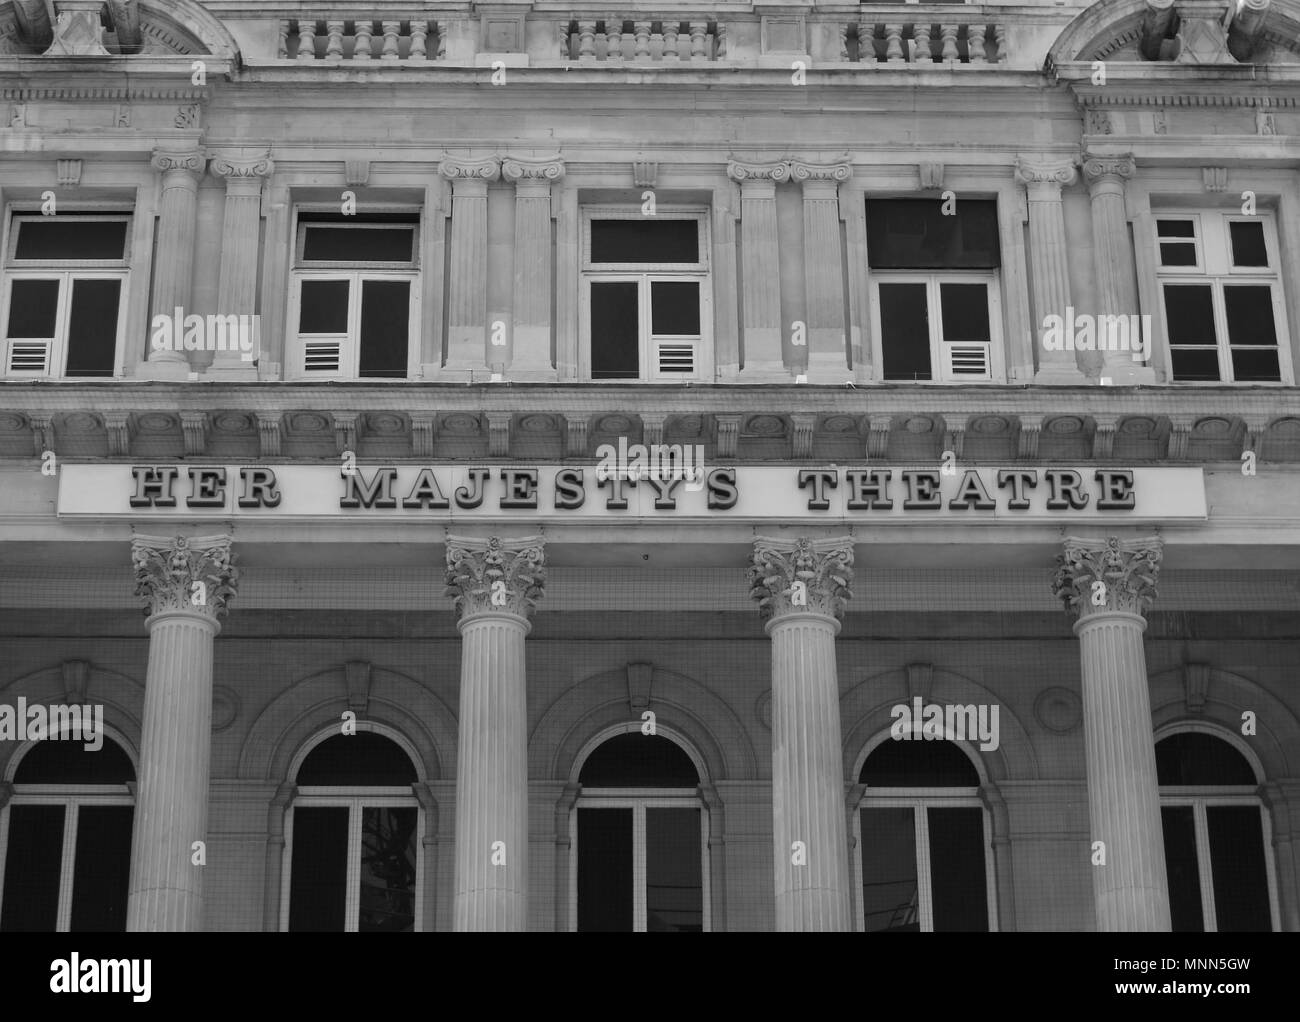 LONDON - MAY 18, 2018: ( Image digitally altered to monochrome ) Her Majesty's Theatre, The hit musical The Phantom of the Opera has been playing at H Stock Photo